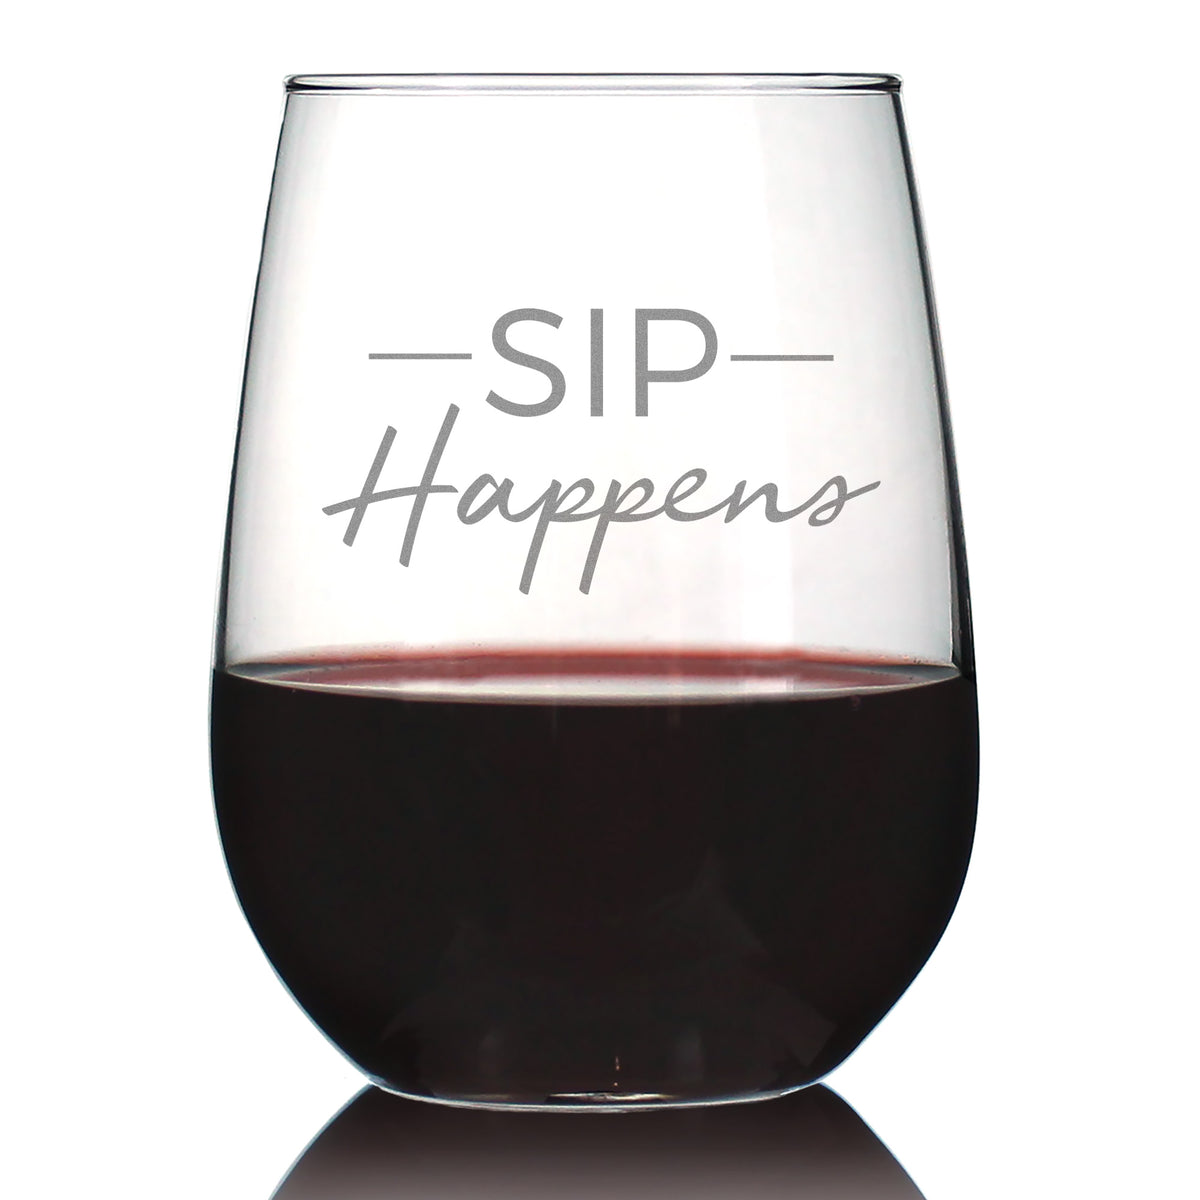 Sip Happens – Cute Funny Wine Stemless Glass, Large 17 Ounces, Etched Sayings, Gift Box